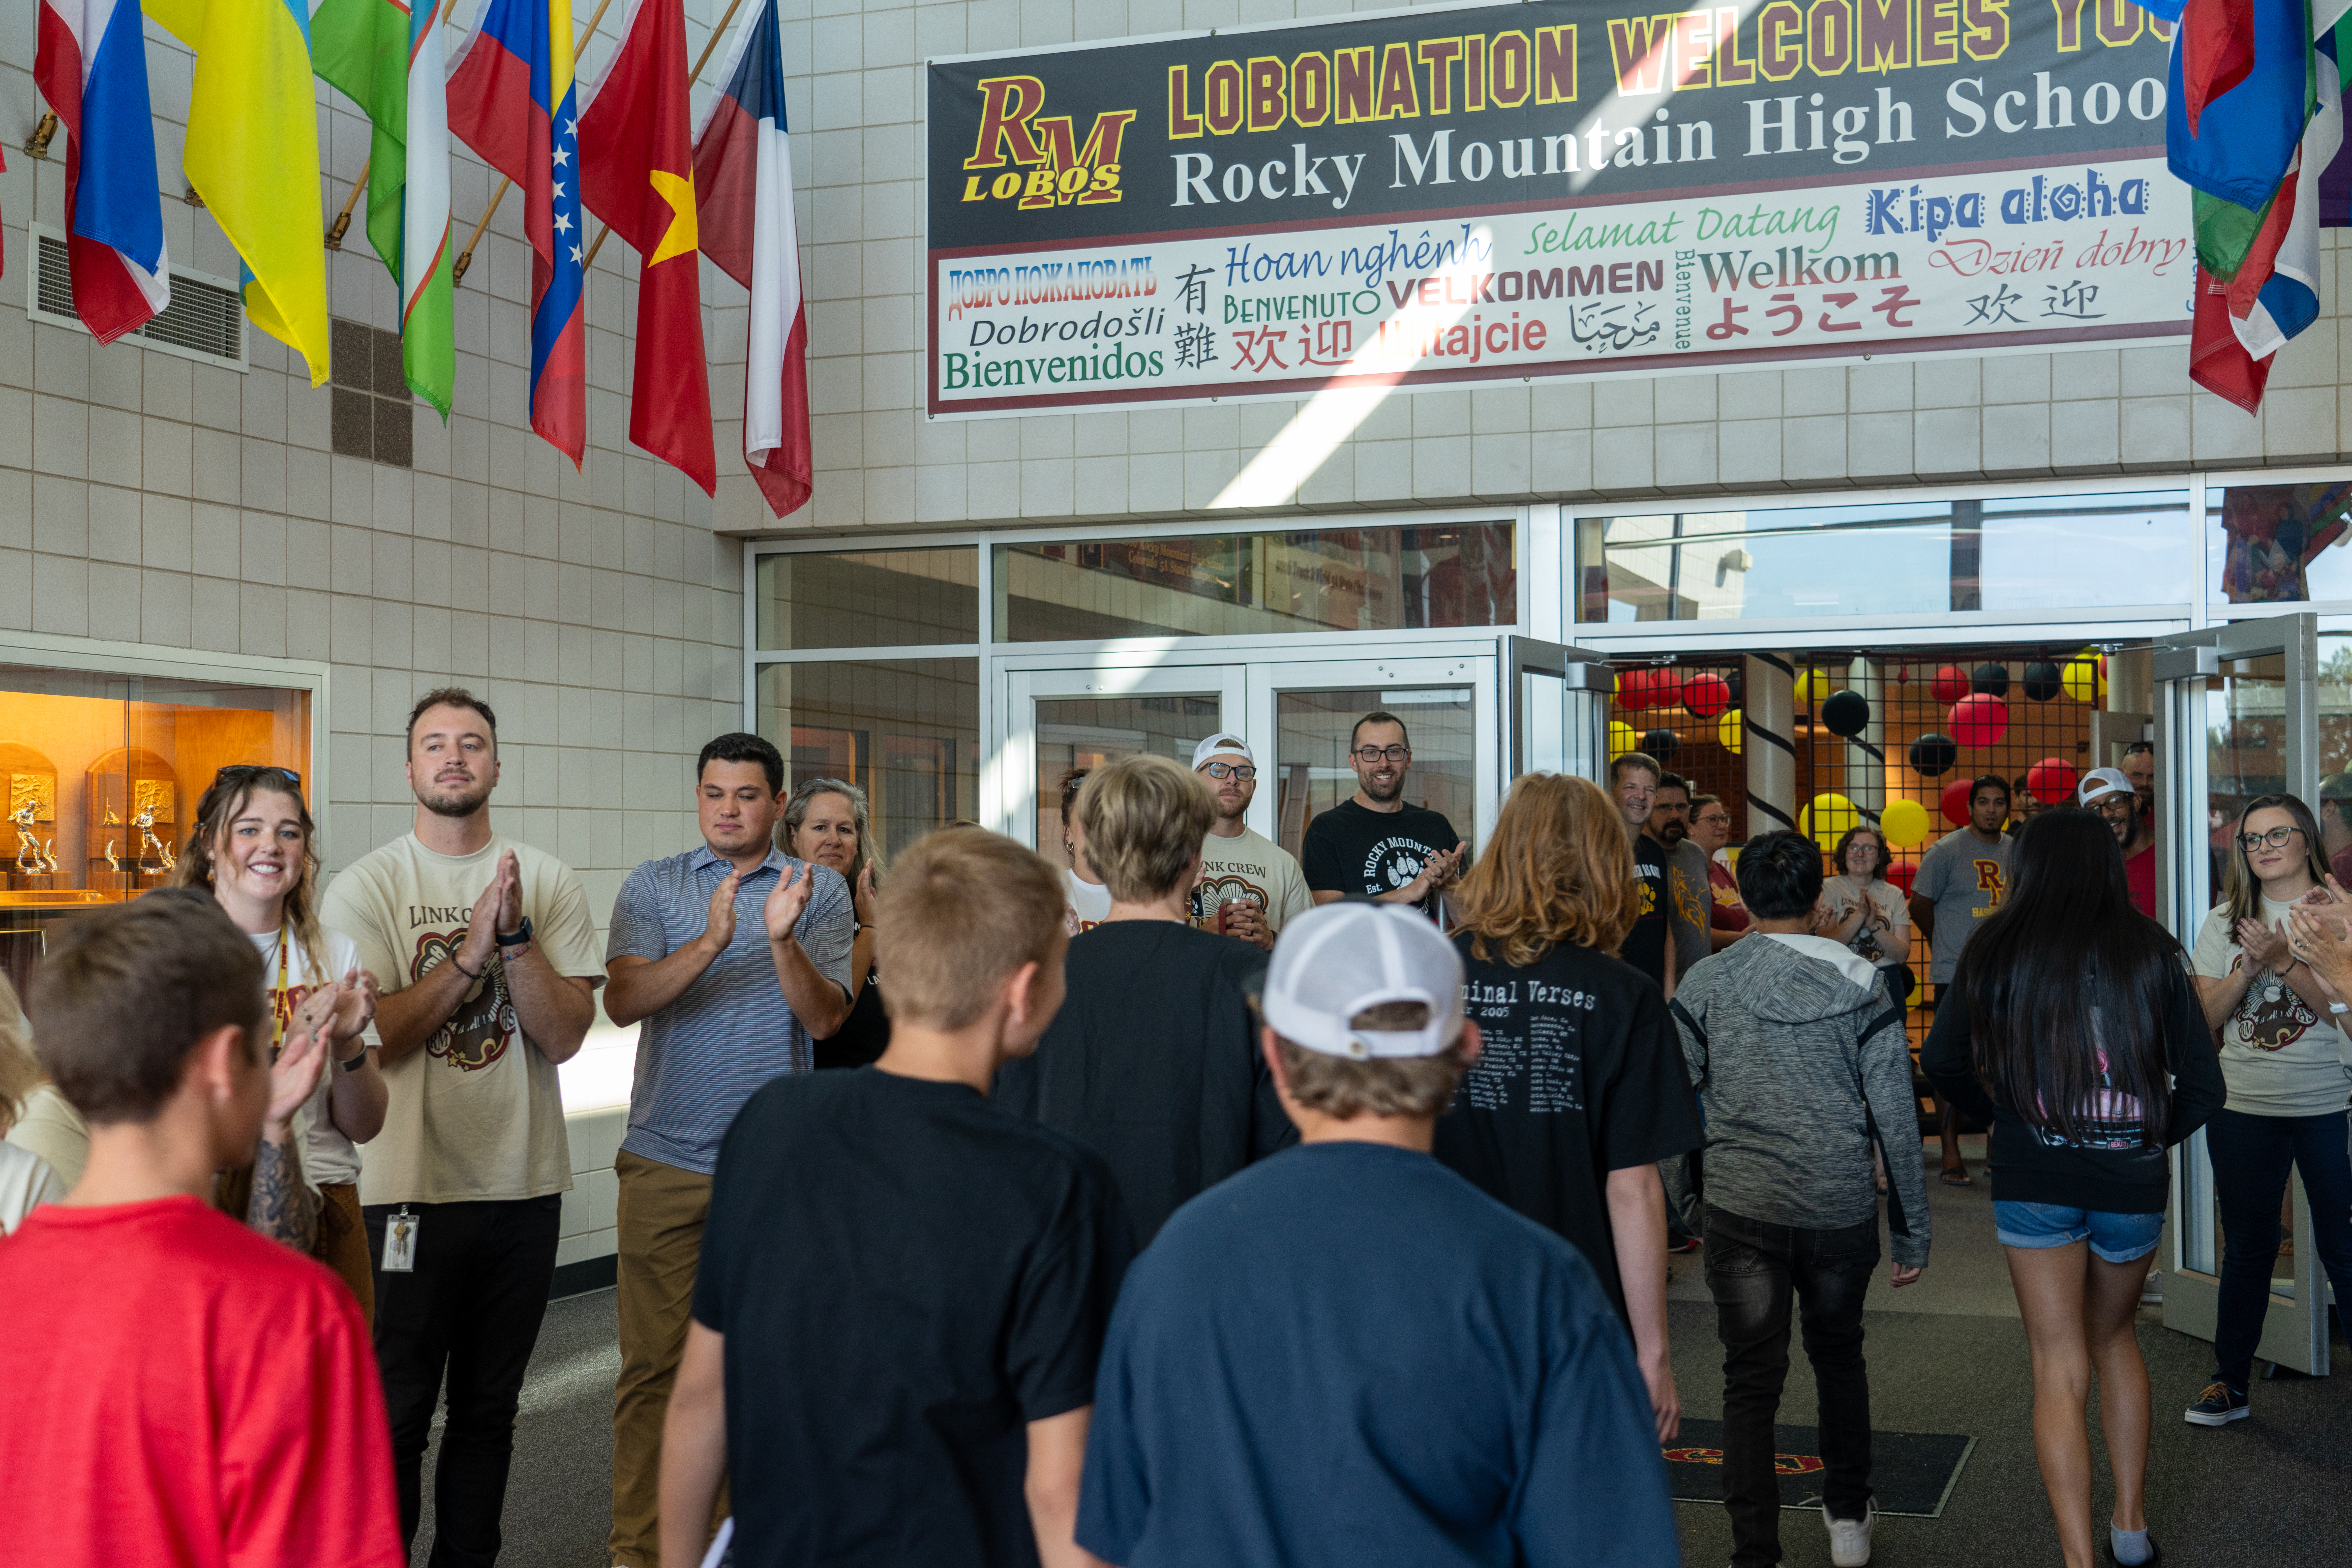 Students arrive at Rocky Mountain High School greeted by staff.